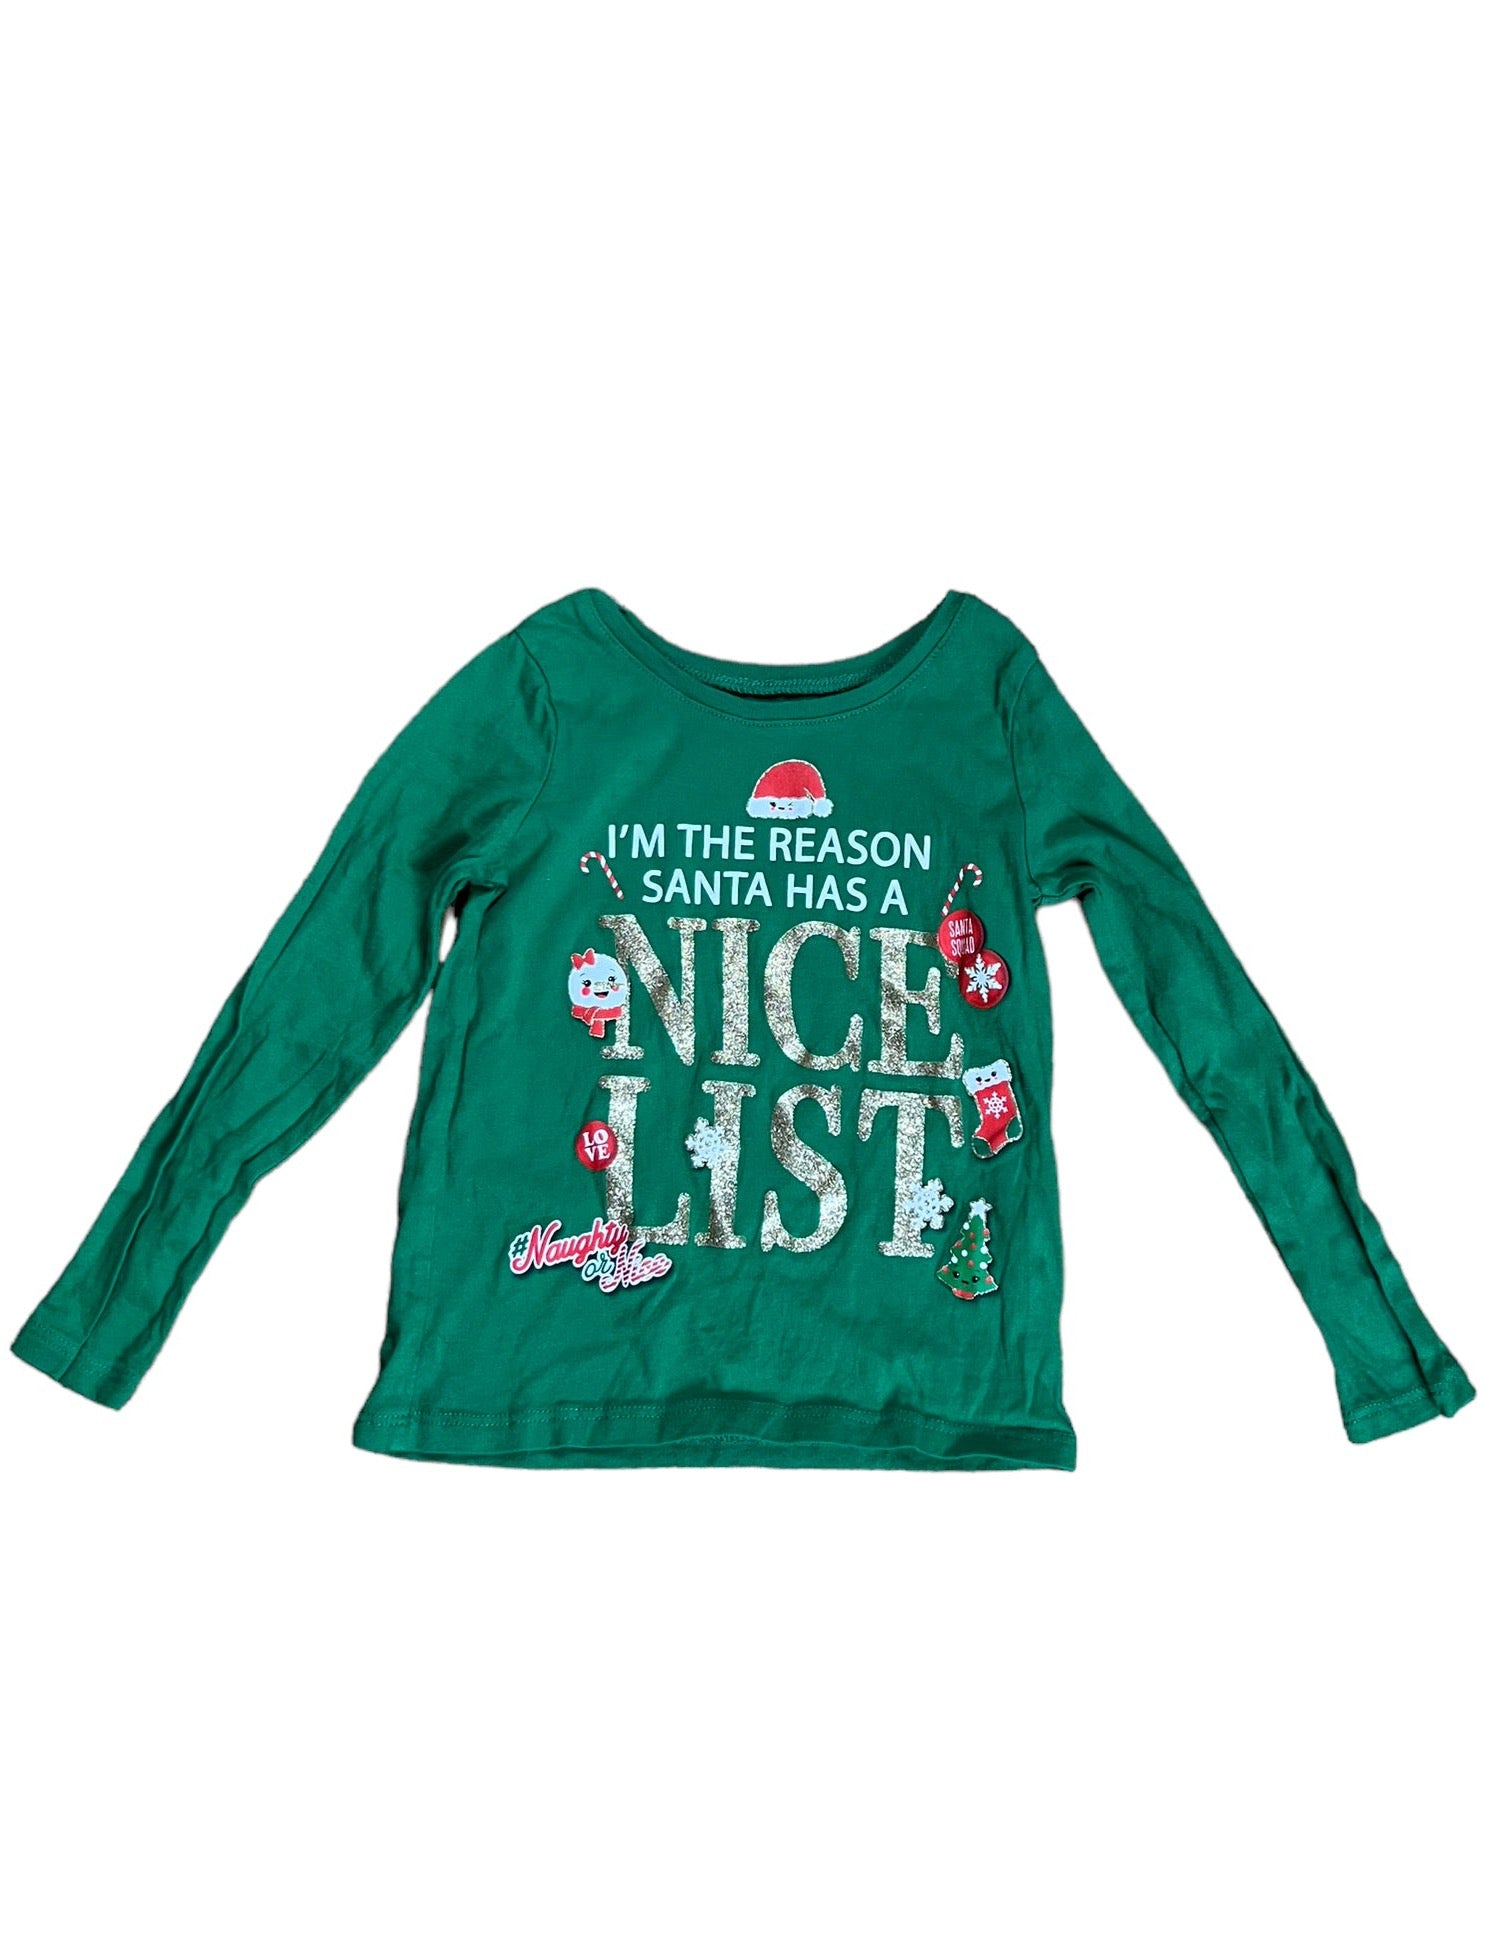 Childrens's Place Christmas Top